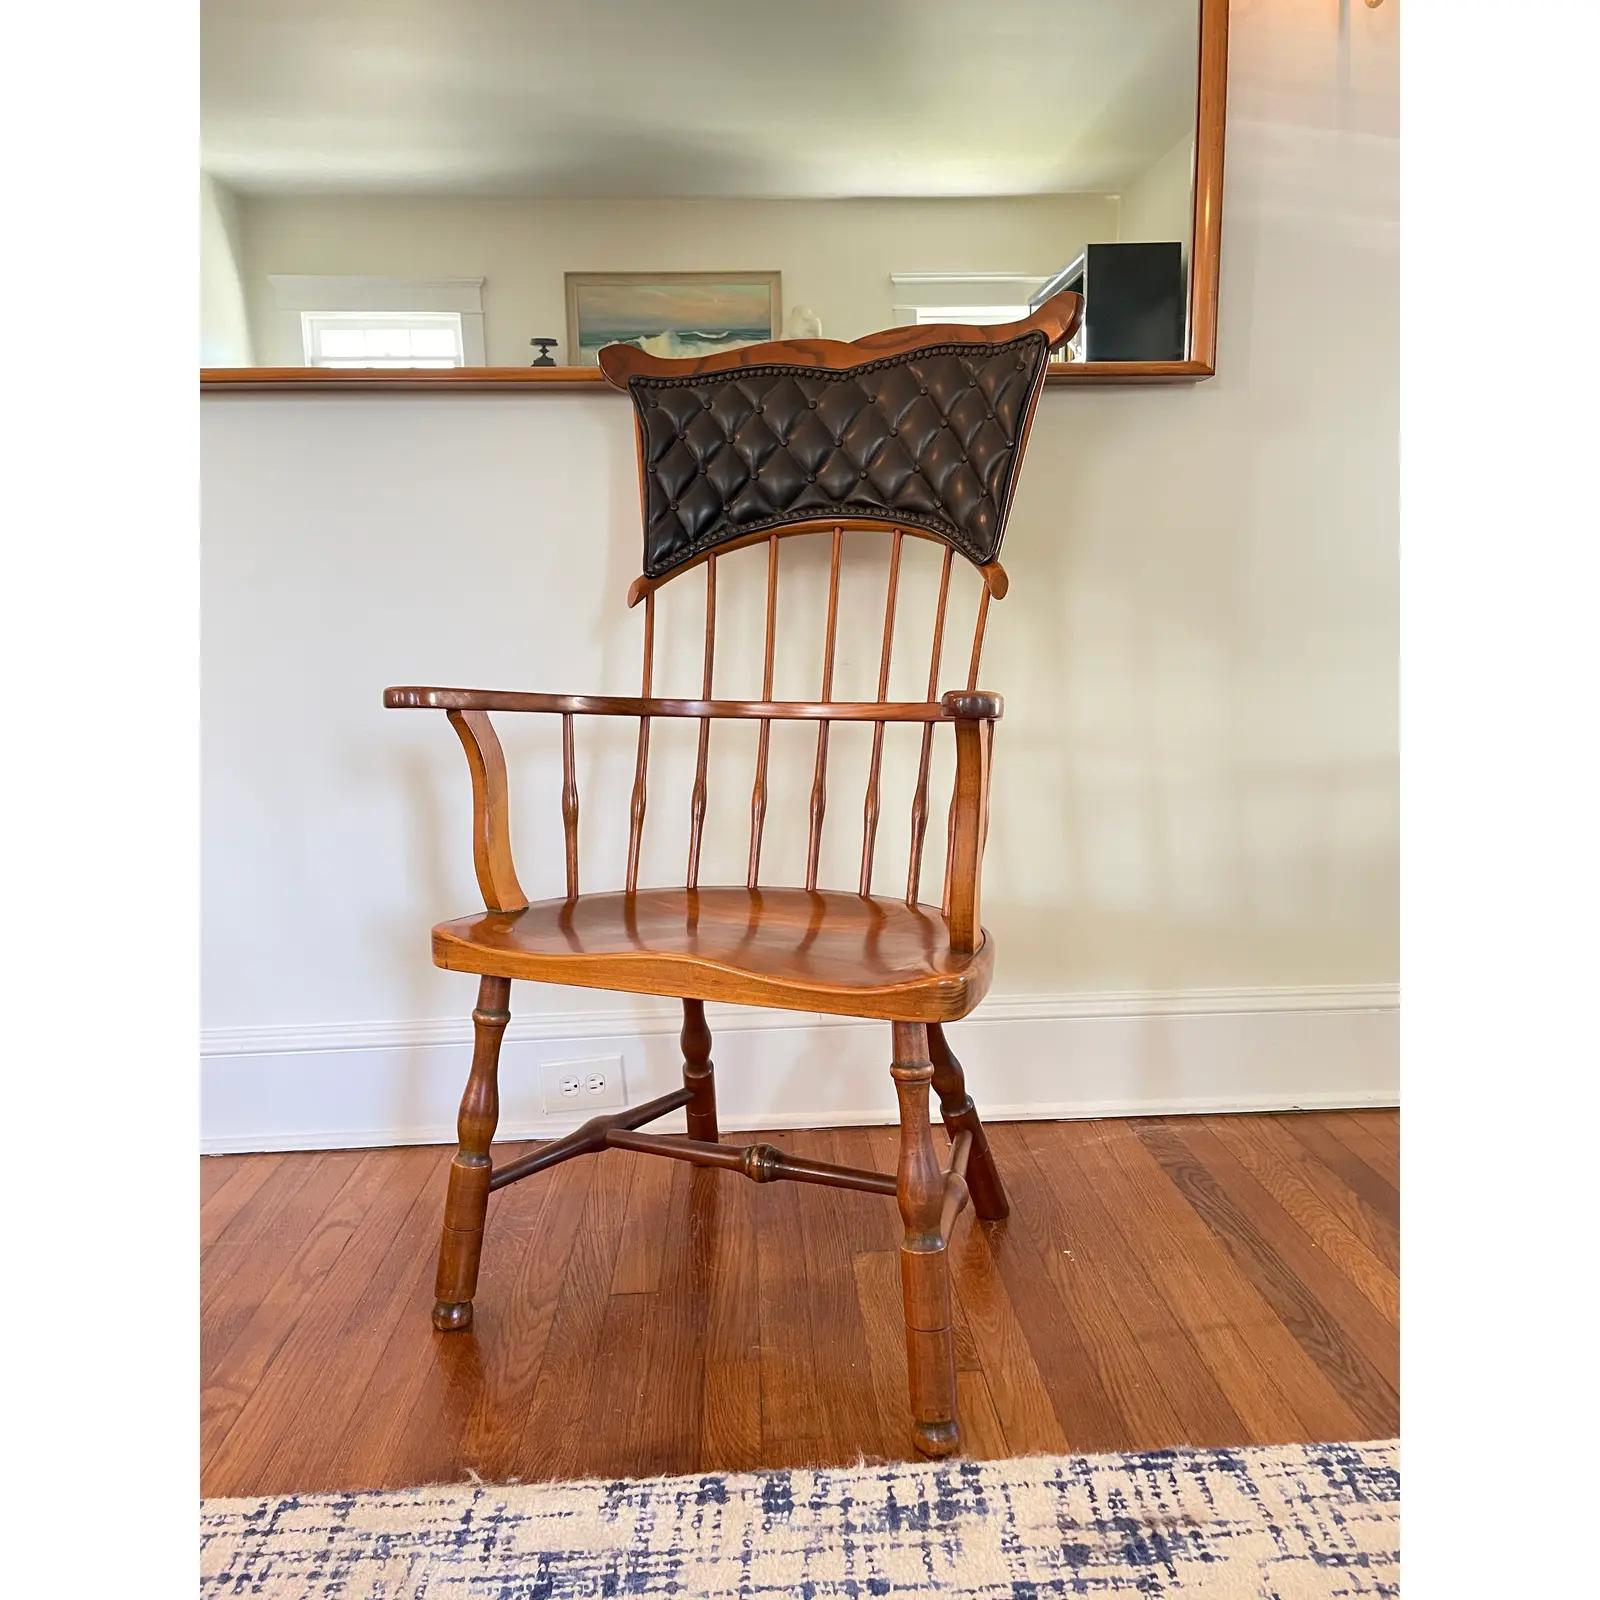 Great classic Duckloe Brothers Mystic Seaport chair. Highback Windsor with tufted leather backing secured with hobnails.
Curbside to NYC/Philly $400